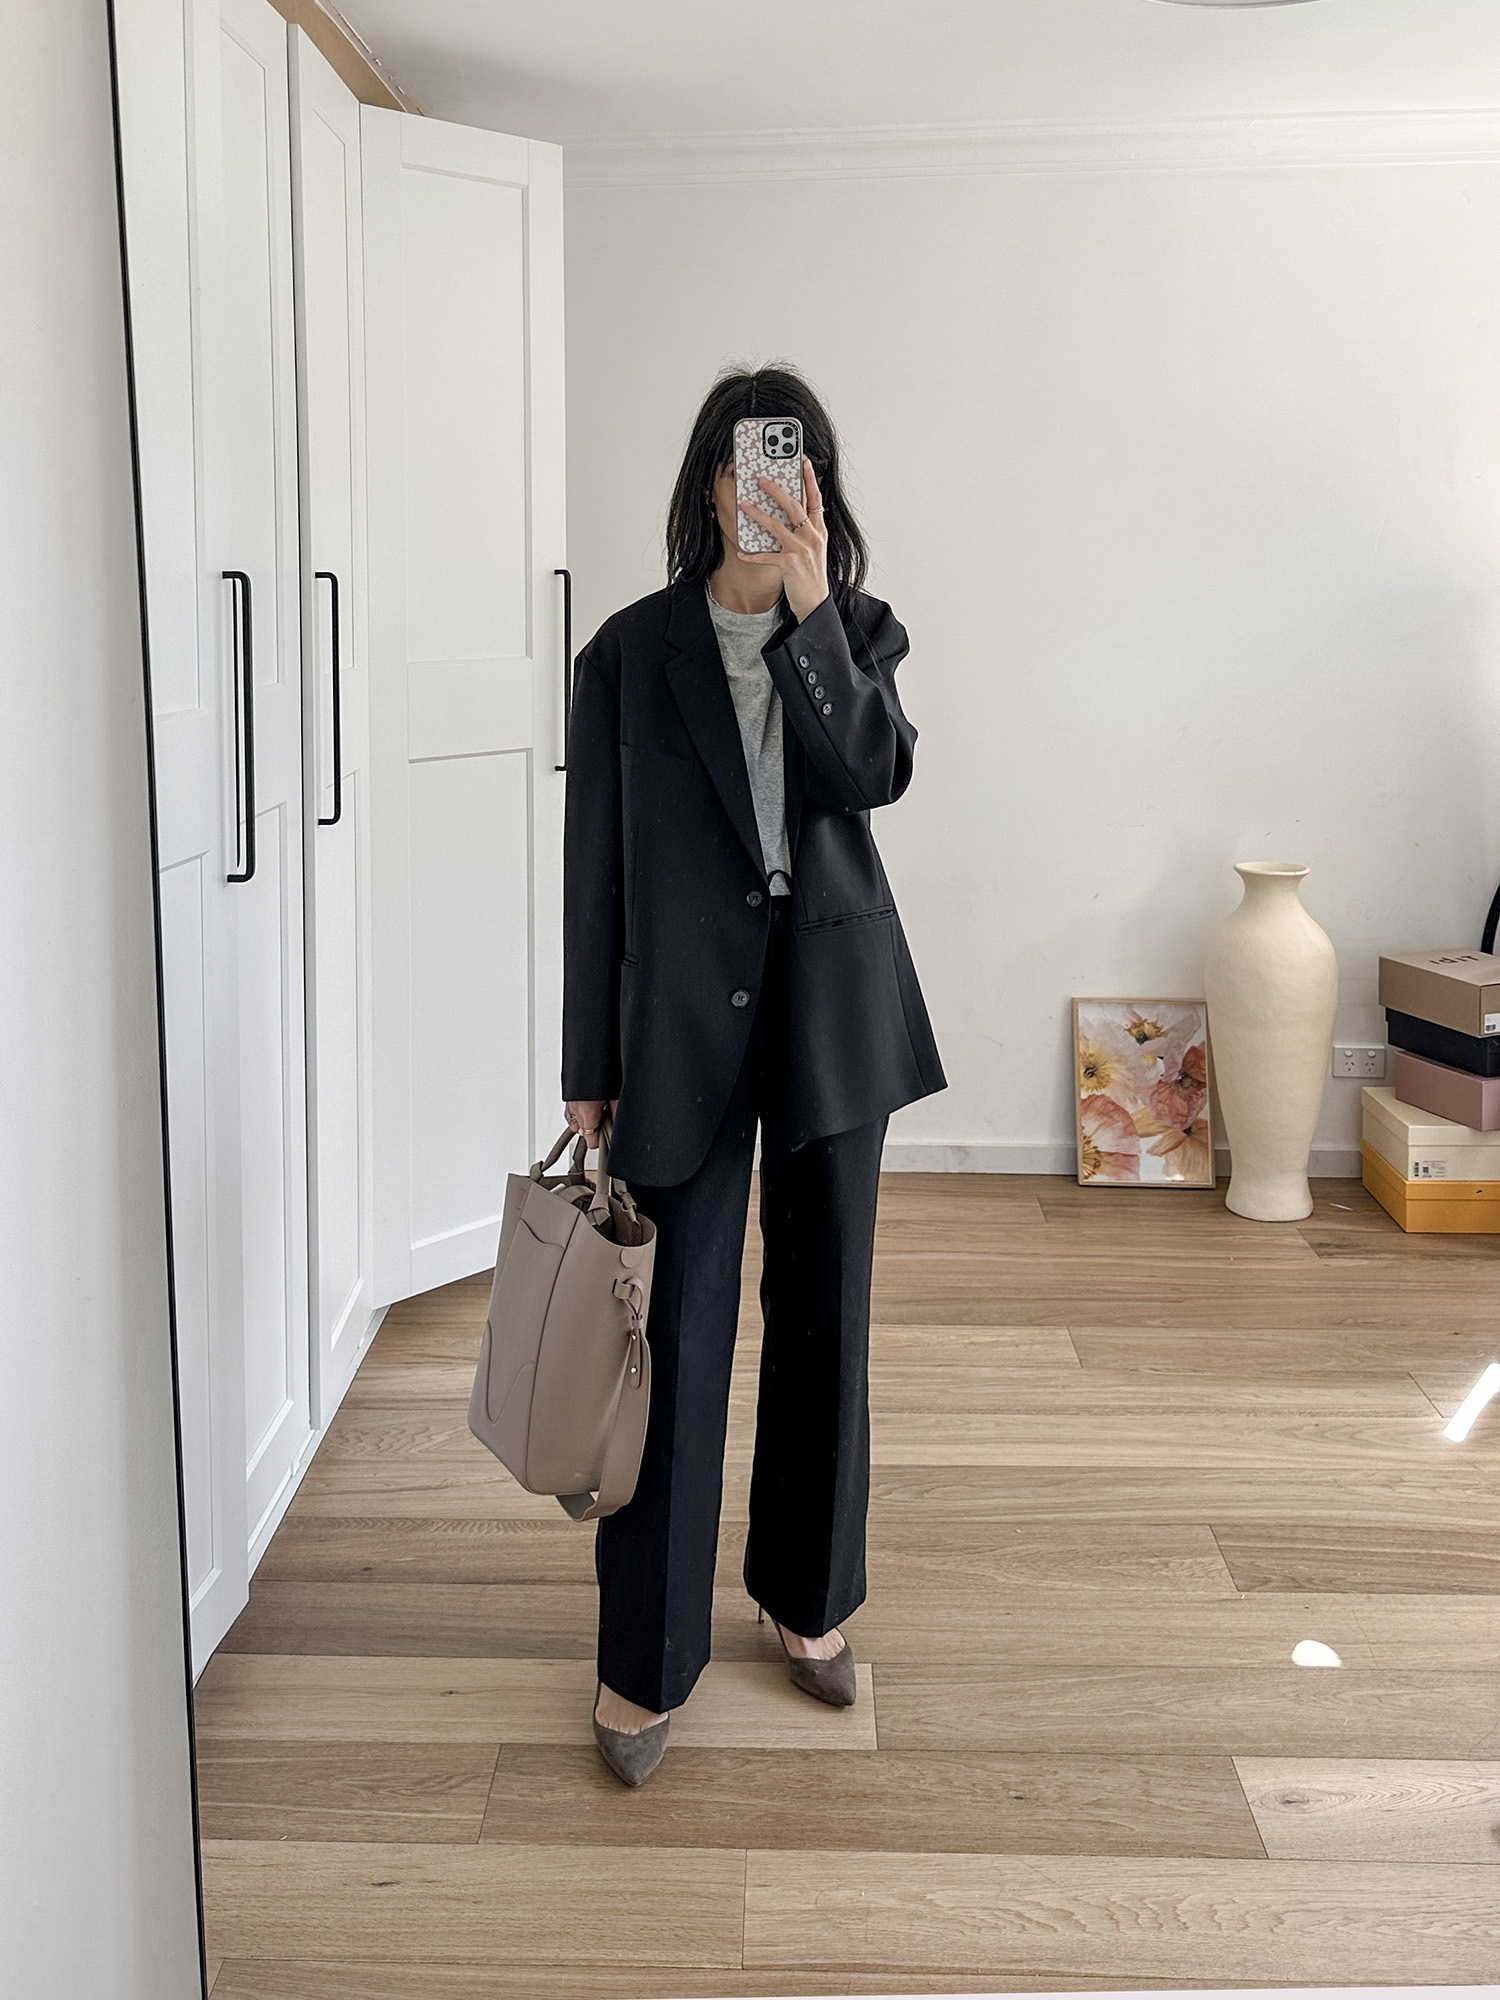 Wearing black wool trousers for the office with Sarah Flint perfect pumps